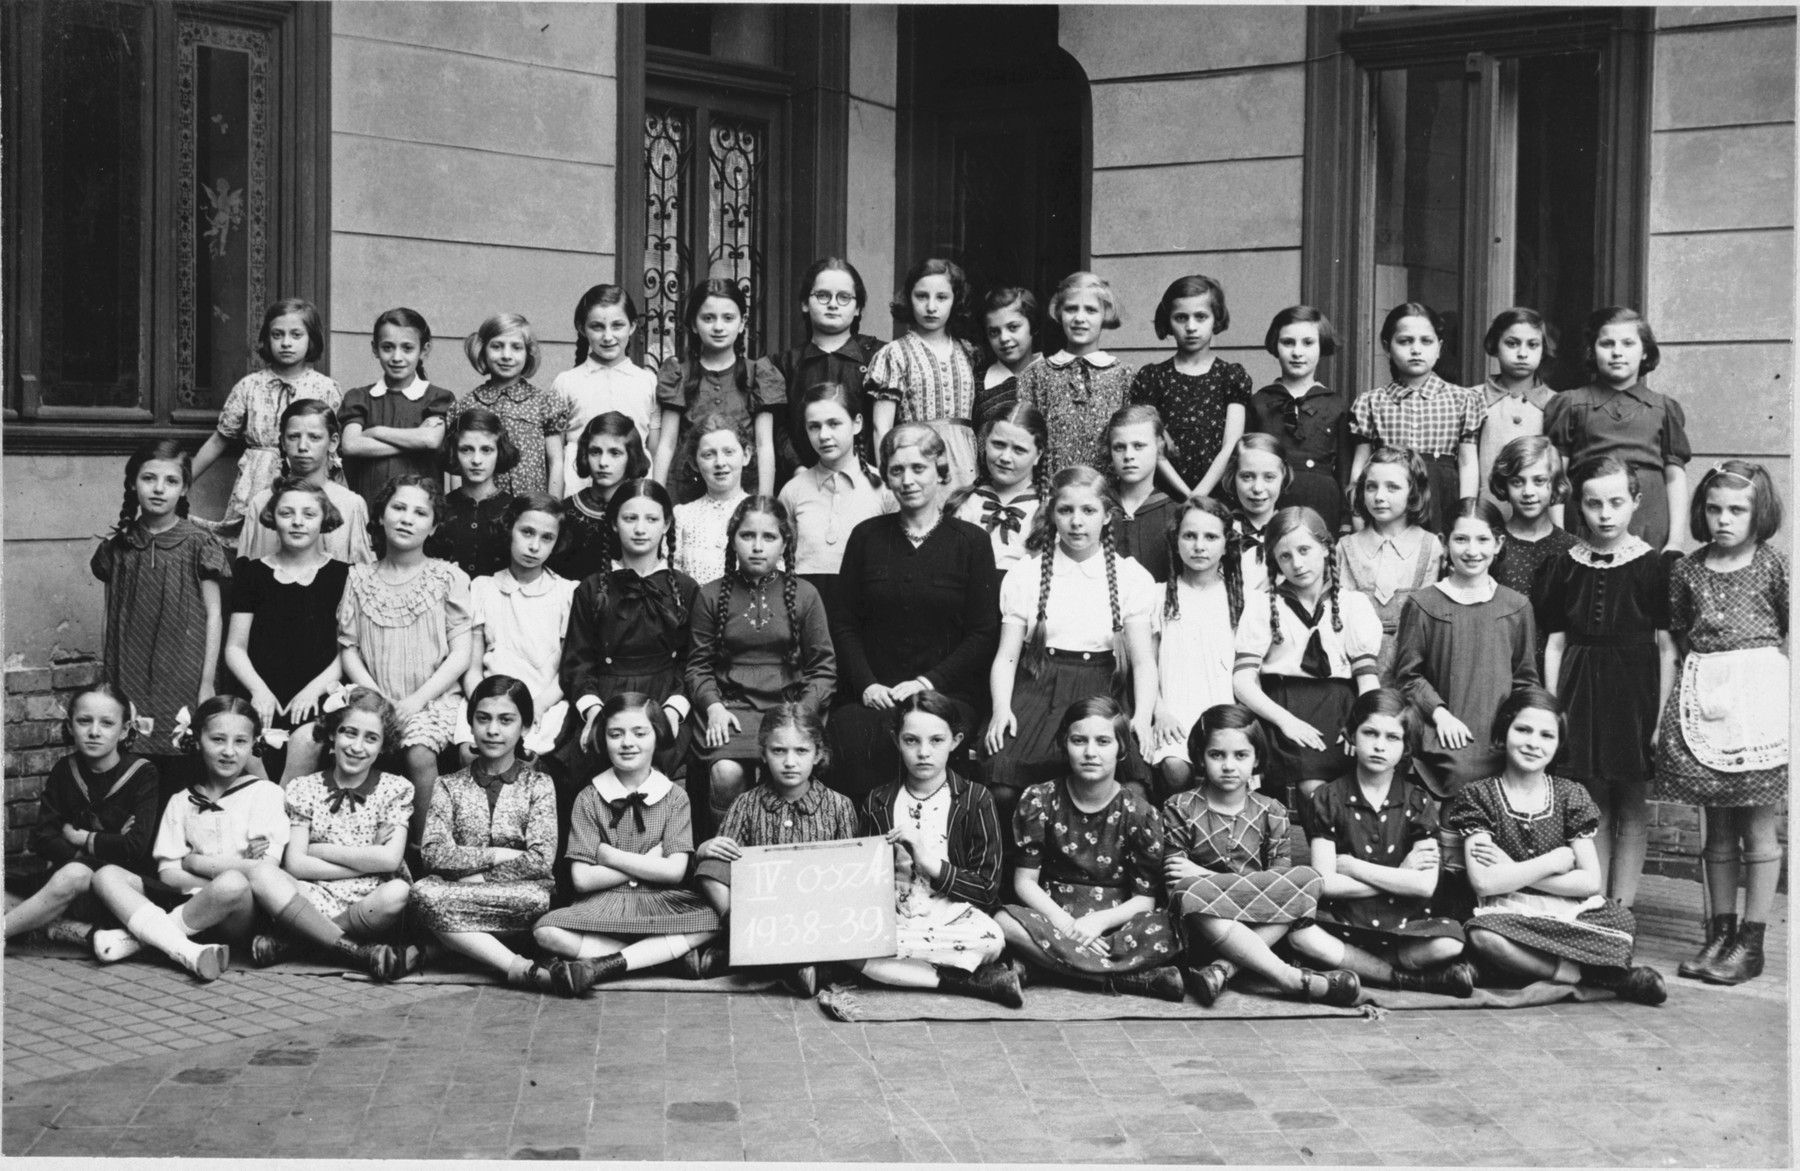 Group portrait of an elementary school class of an Orthodox Jewish school in Budapest which met in the Kazinczy Street Synagogue.

Among those pictured is Anna Roz (top row, fourth from the right.)